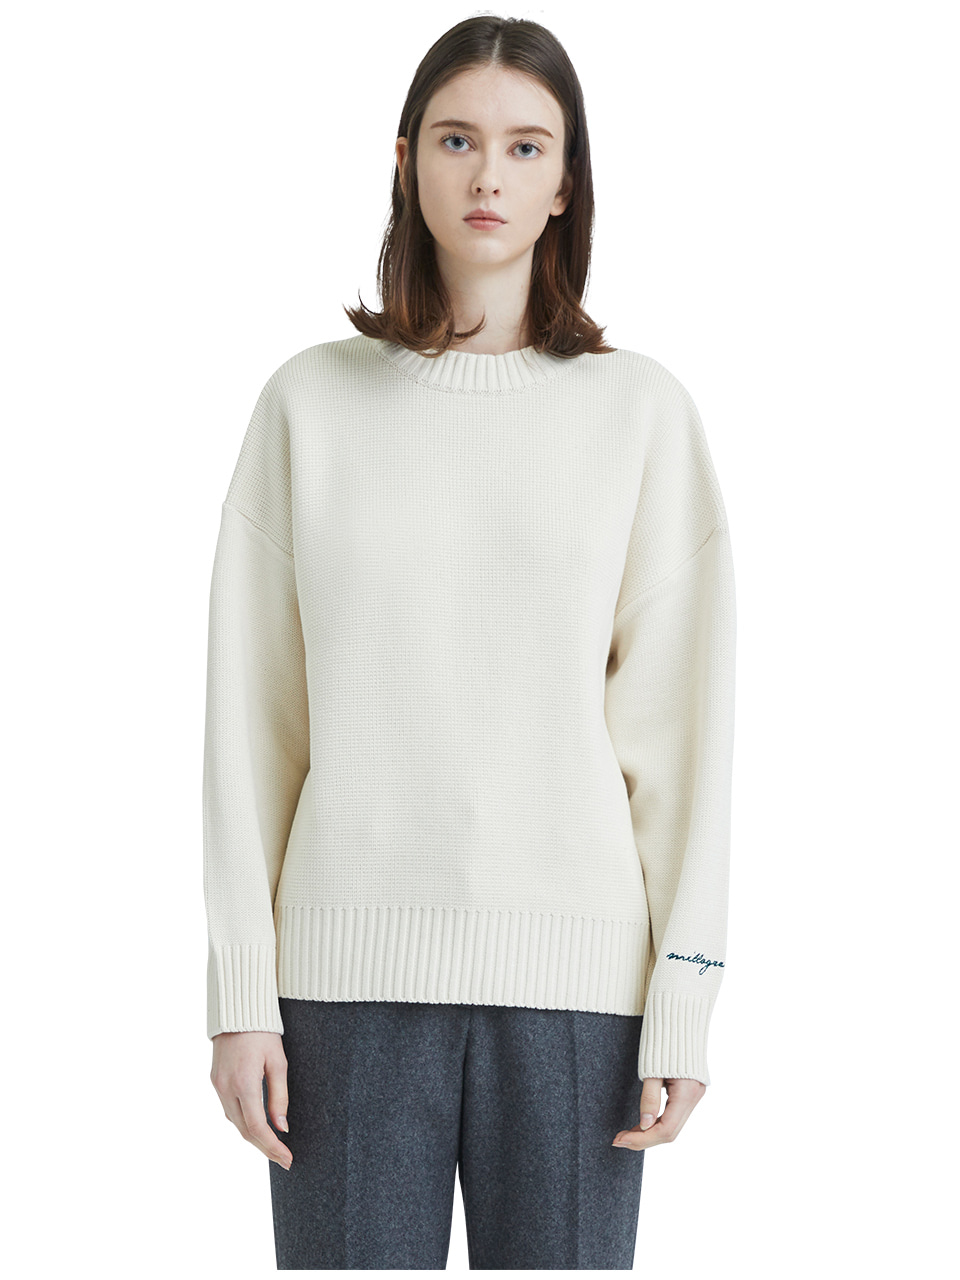 embroideried cuffs sweater - ivory